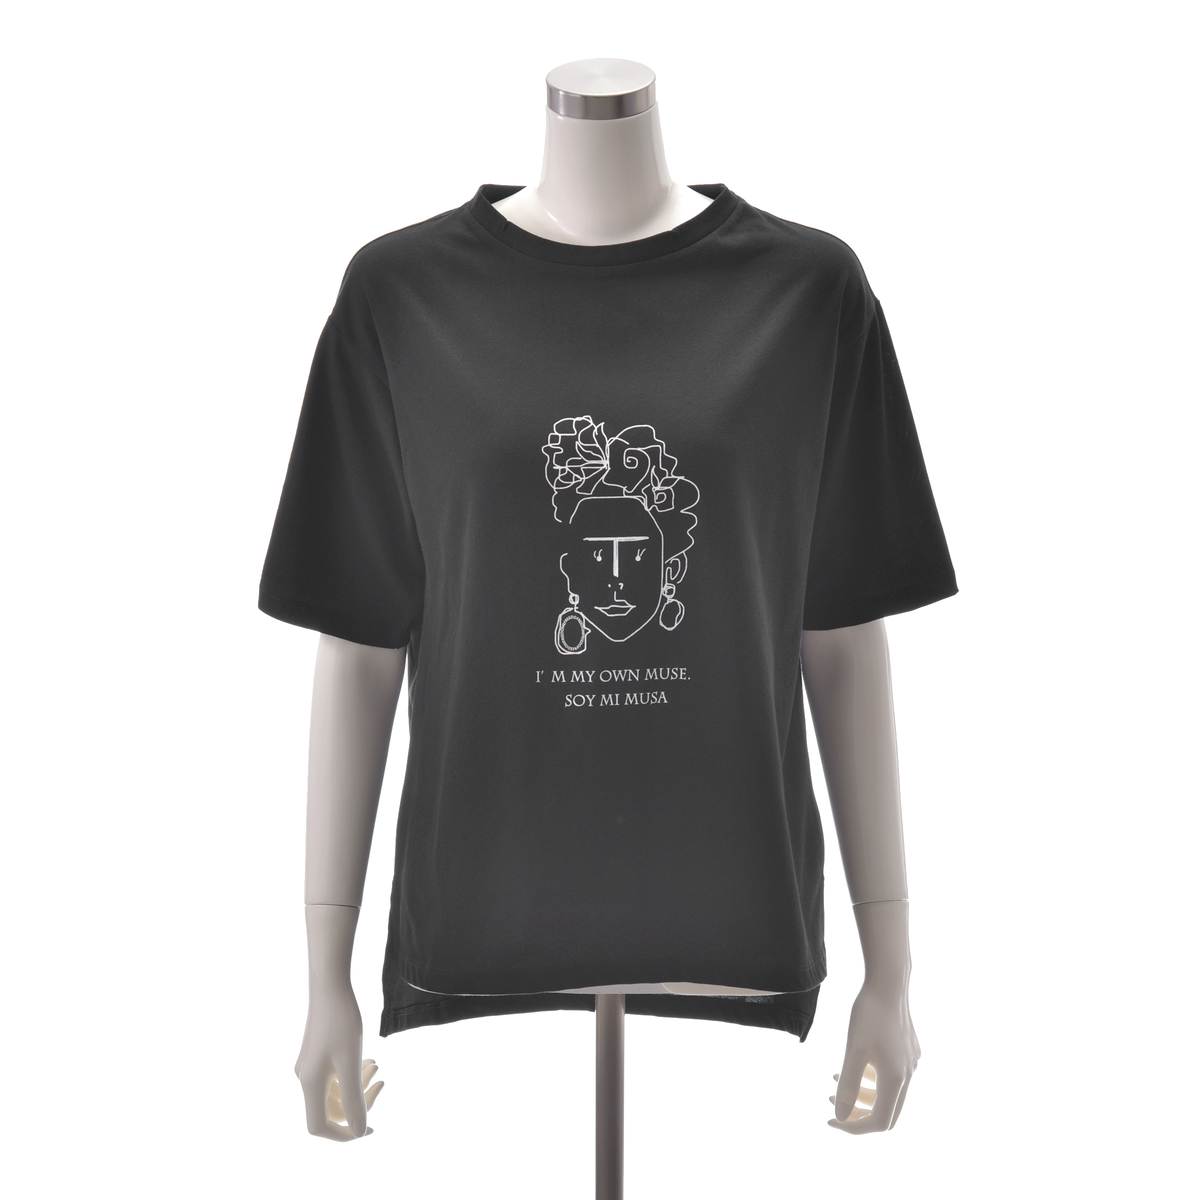 Coeur Sucre ロゴ イラストtシャツ2枚セット クールシュクレ Coeur Sucre No Qvc Jp